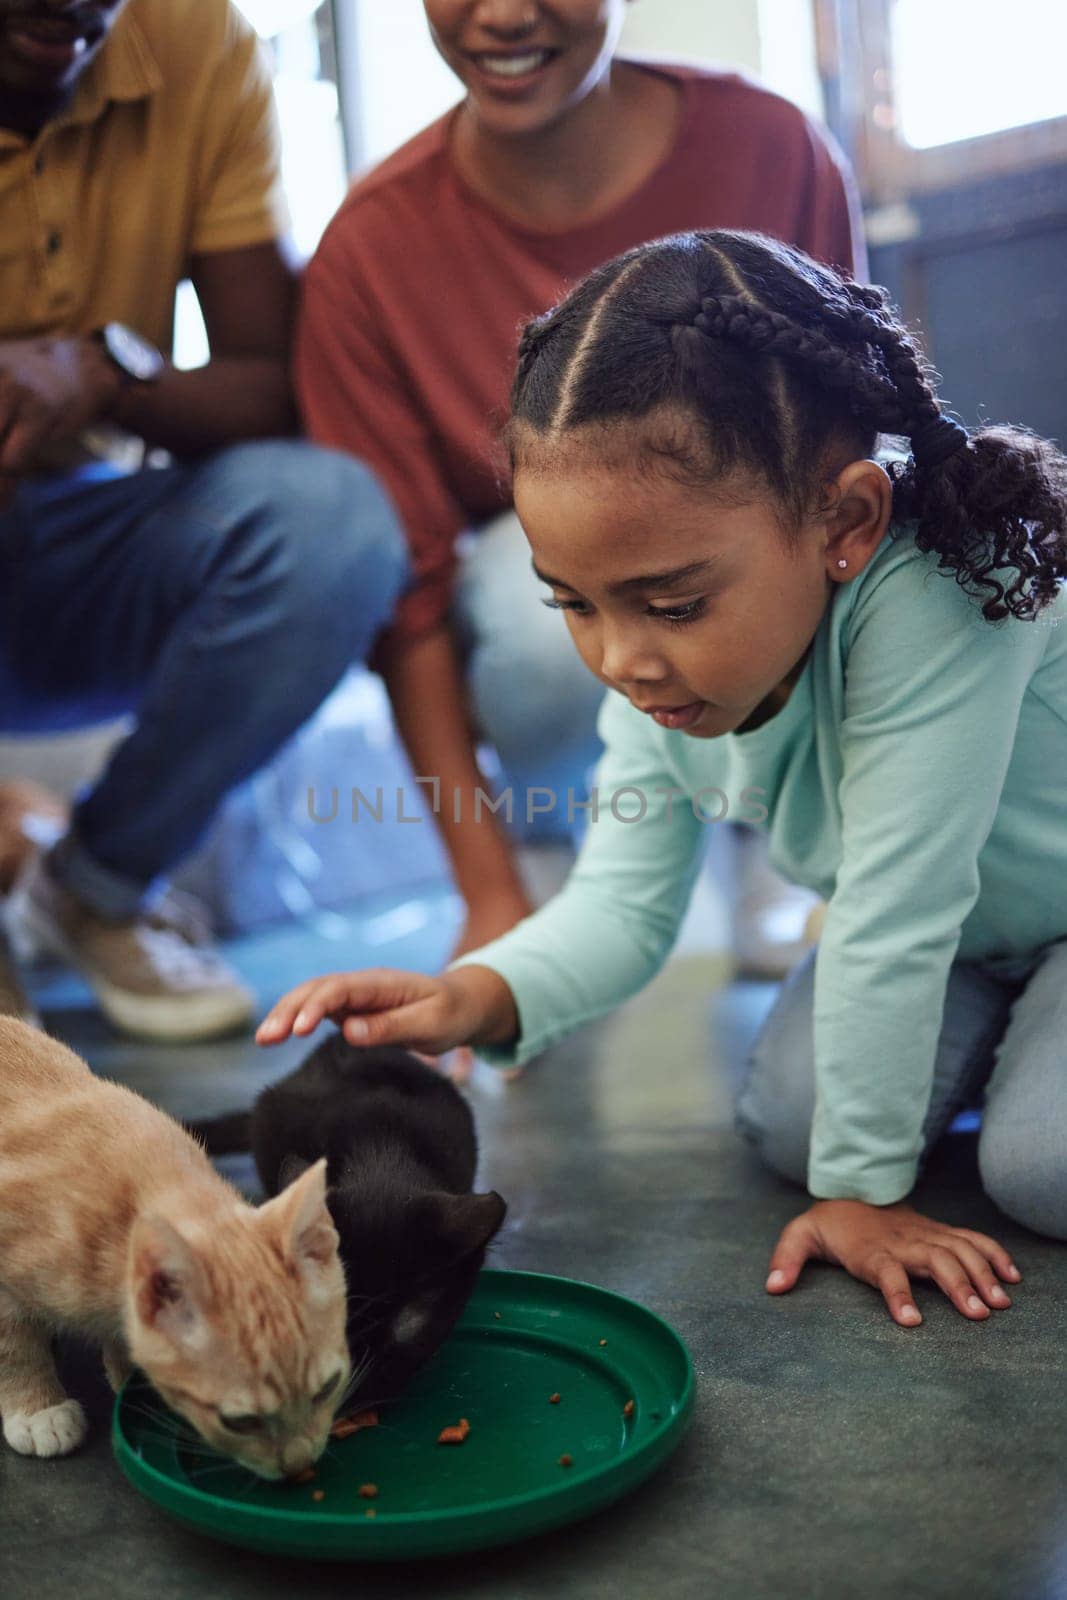 Child, cats and care while eating food for nutrition for health and wellness, family at animal shelter for charity and volunteer work for rescue animals. Girl showing love and support petting cat.